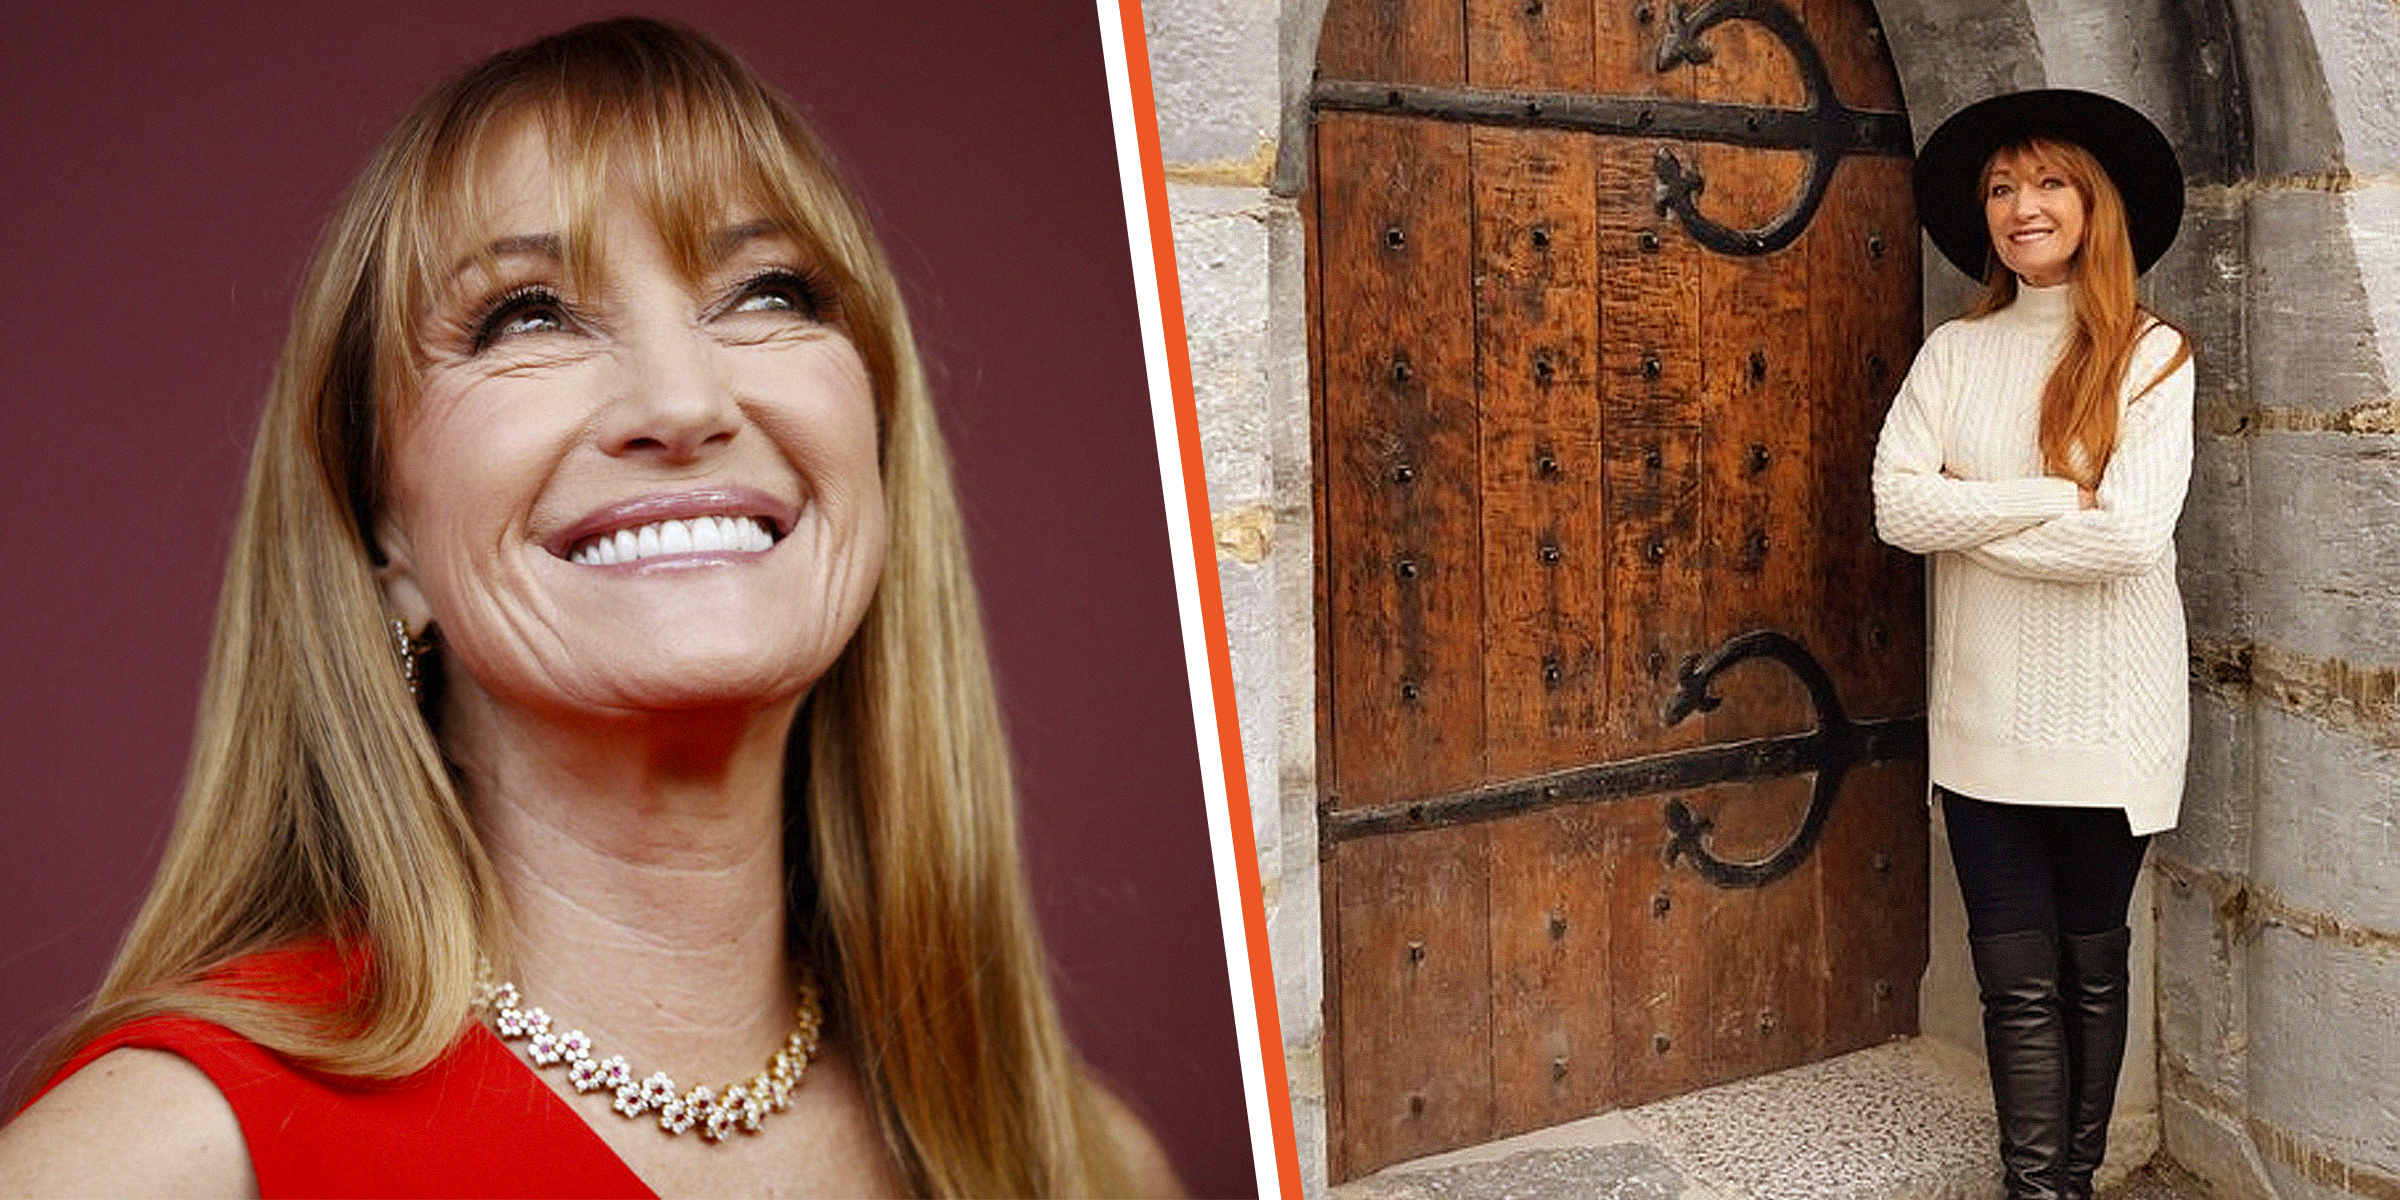 Jane Seymour | Source: Getty Images | Instagram.com/janeseymour